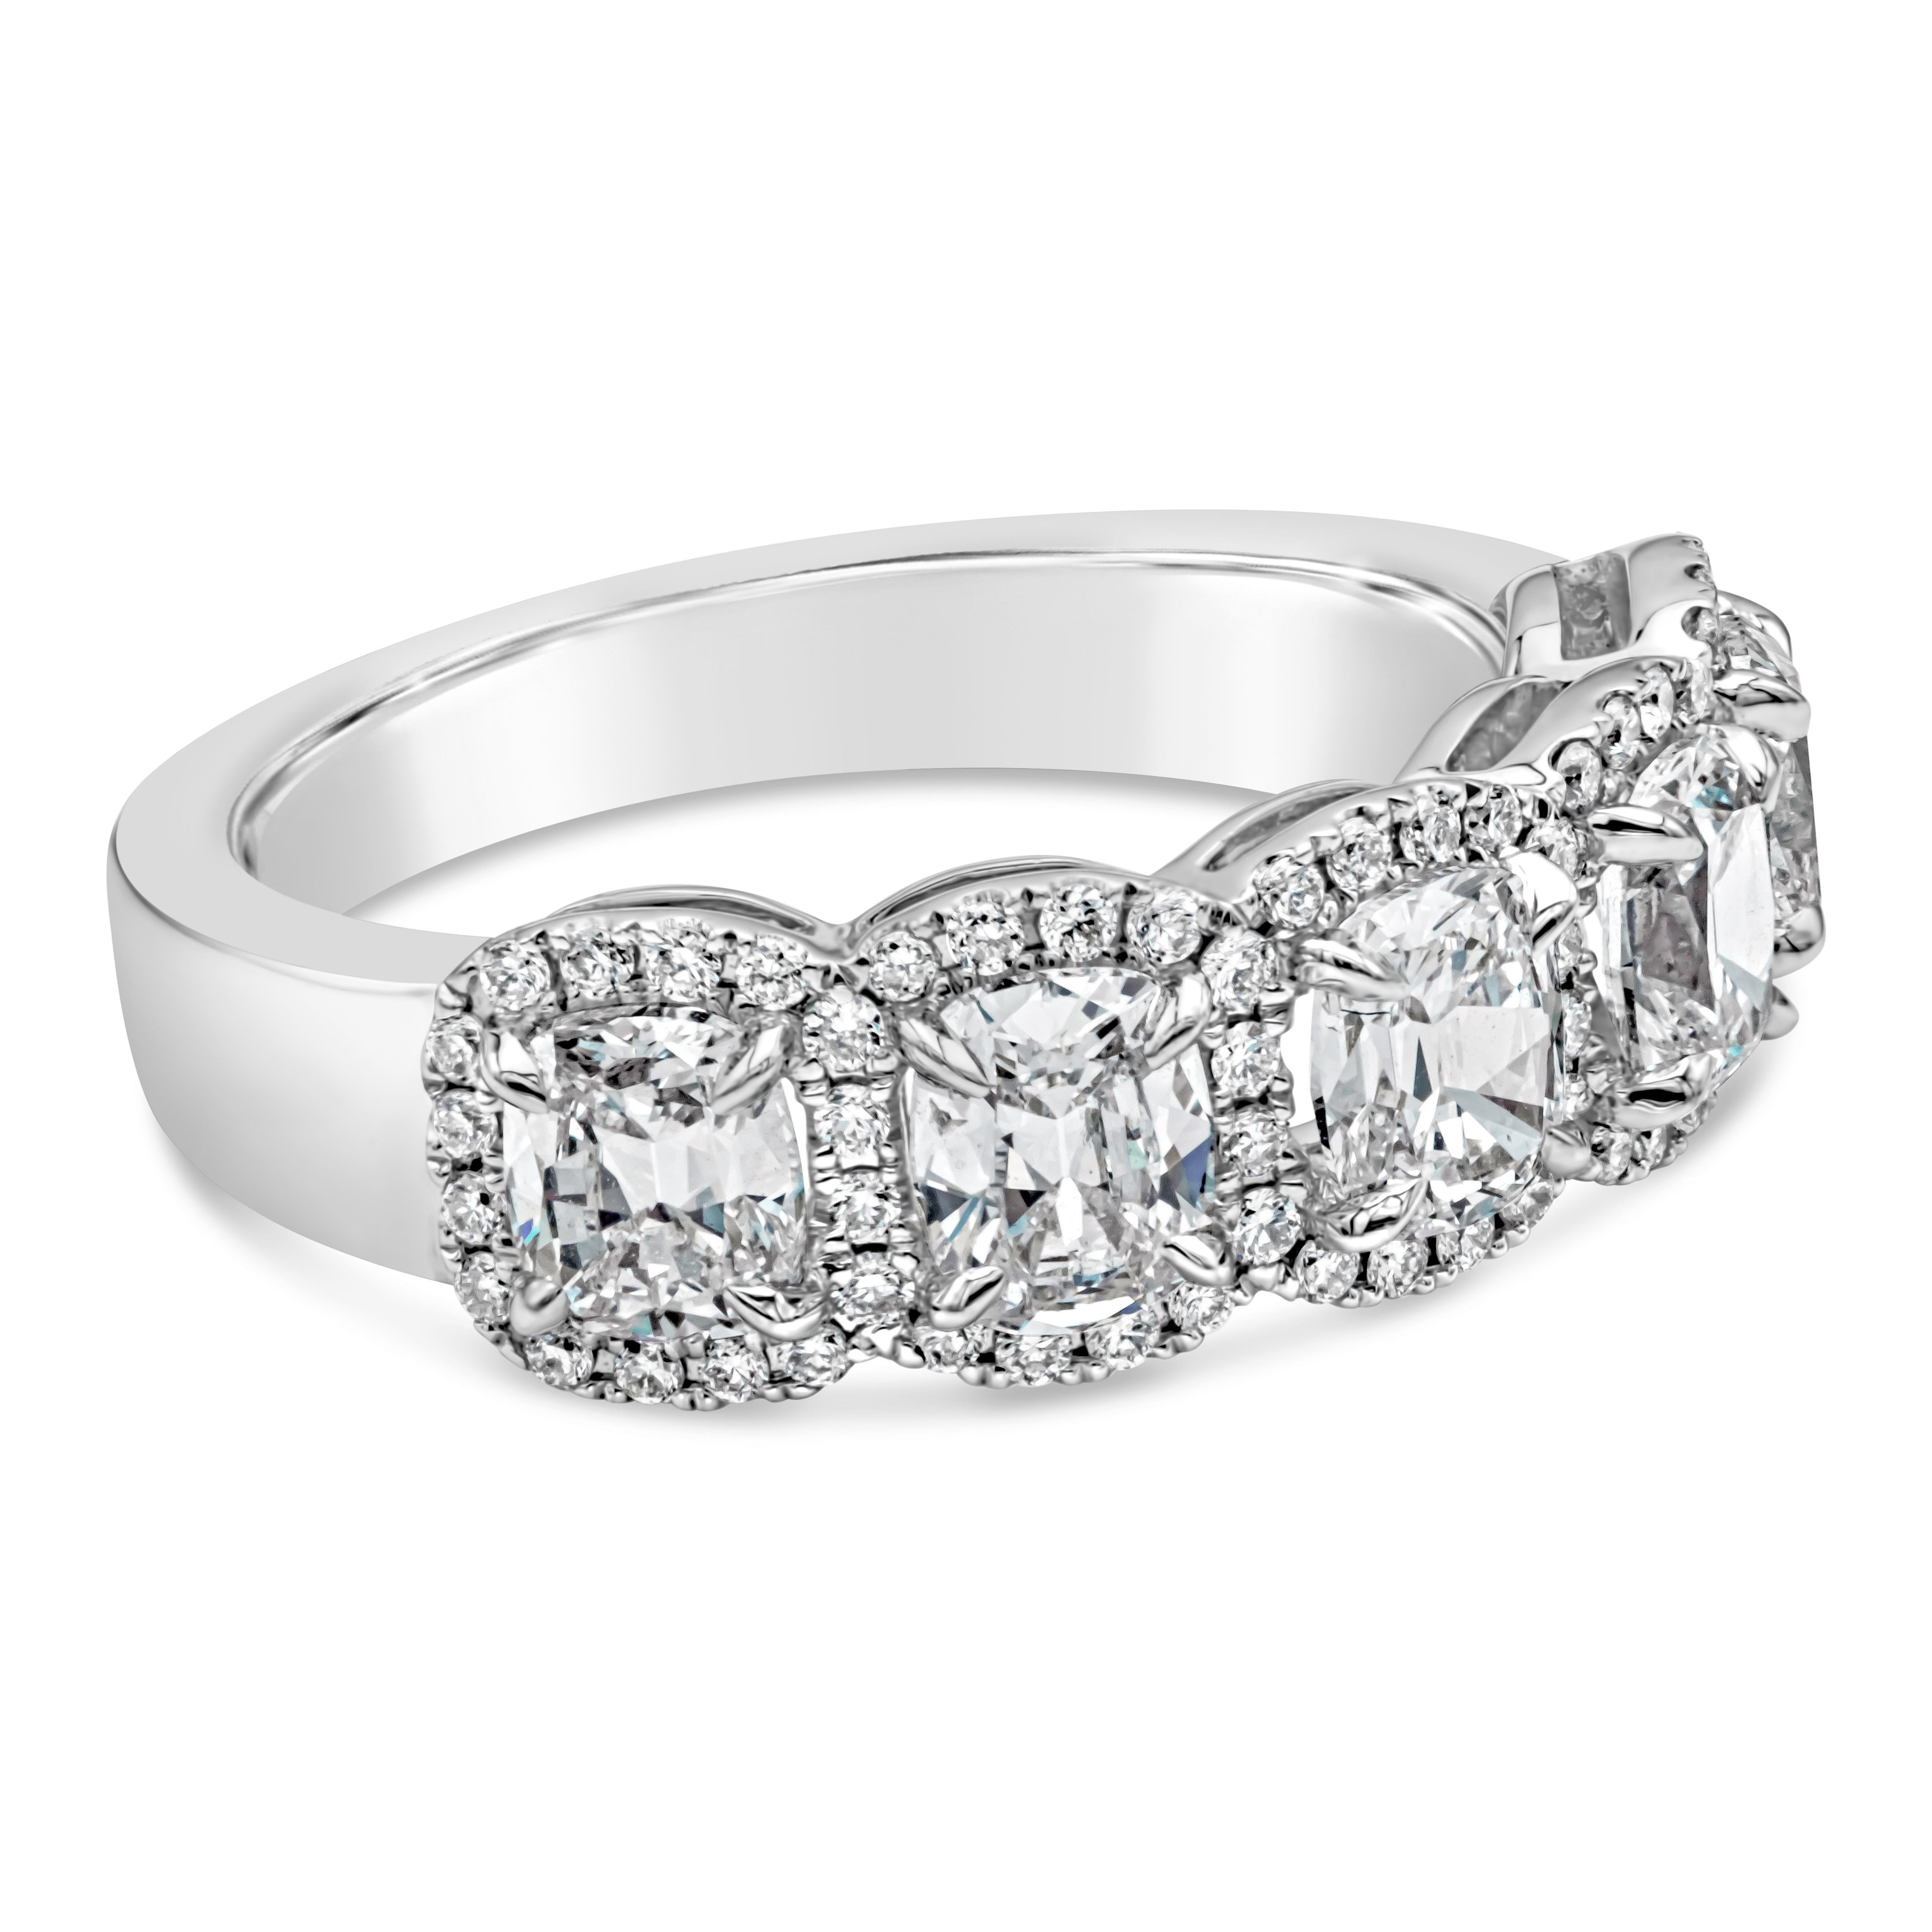 A classic and brilliant five-stone wedding band showcasing five cushion cut diamonds weighing 1.78 carats total, E Color and VS in Clarity. Each cushion cut diamonds are accented by brilliant round diamonds weighing 0.29 carats total. Made with 18K